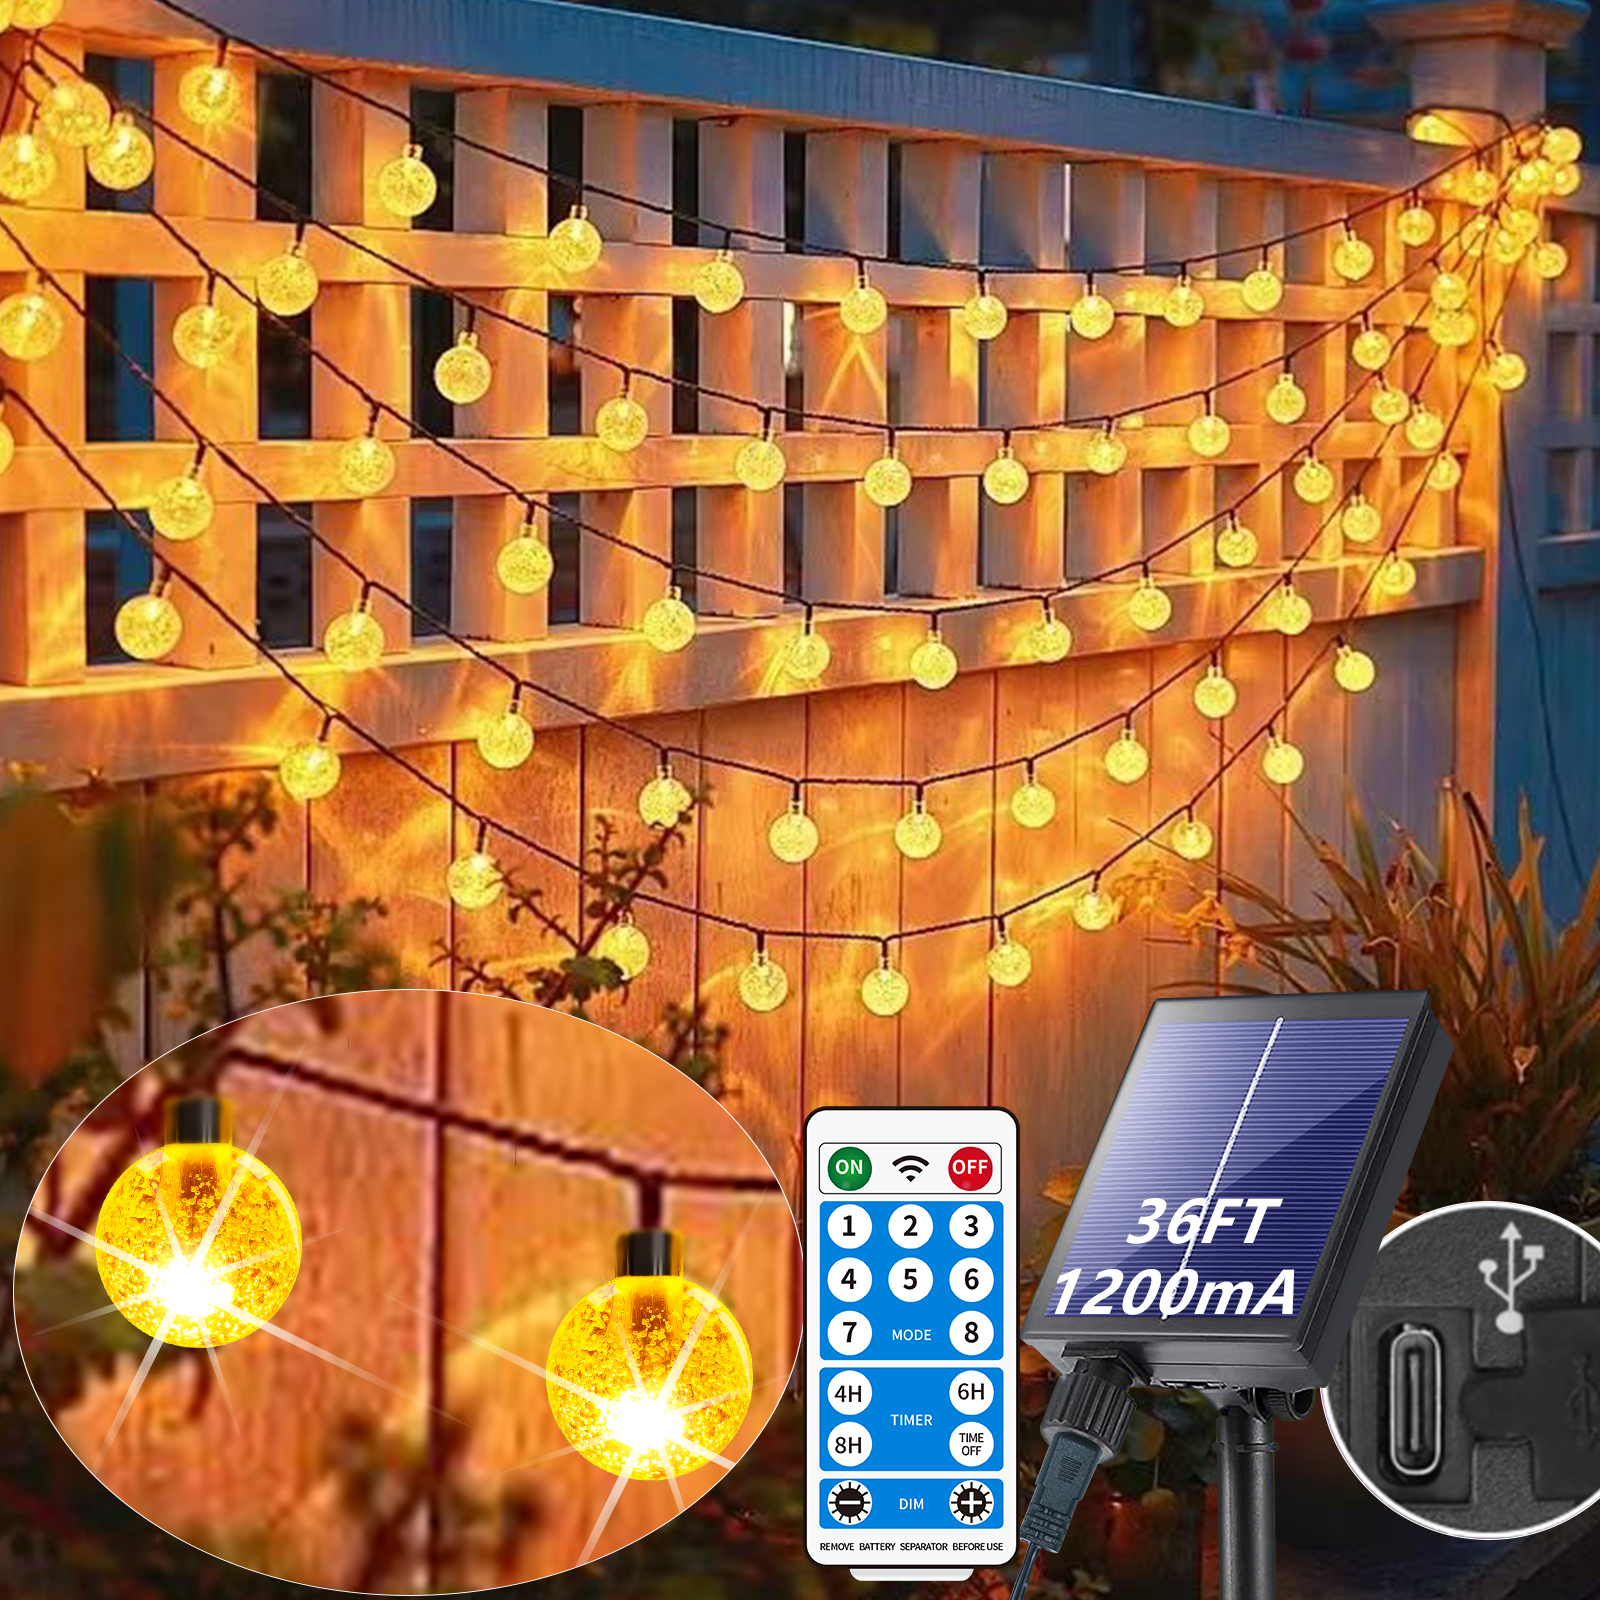 

Solar String Lights Outdoor 39ft 60 Led Large Crystal Globe Lights With Remote Control, Warm White 8 Modes Solar Powered Globe String Lights For Outside Christmas Patio Porch Decor